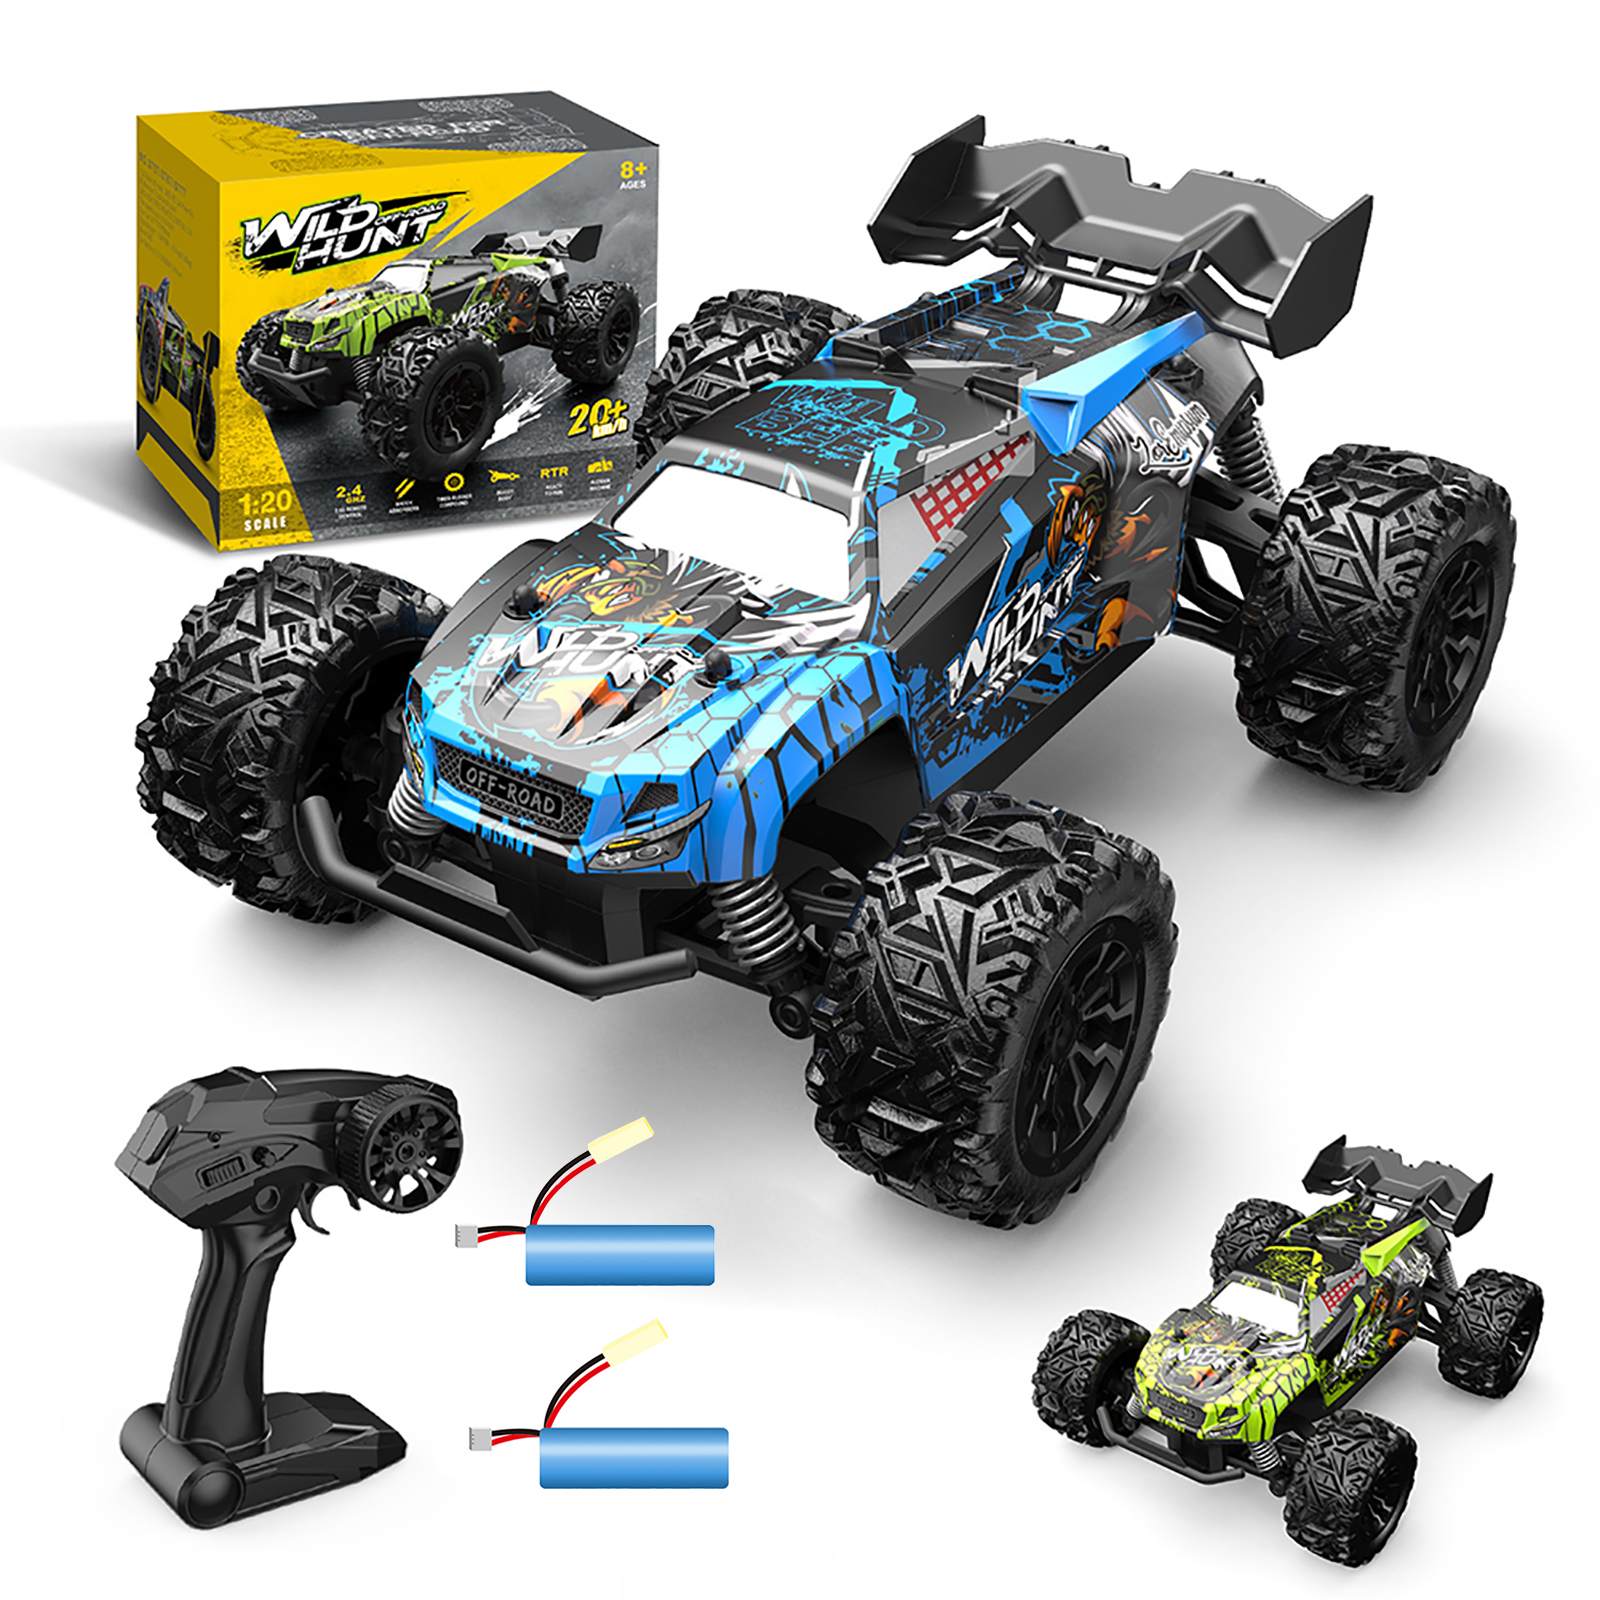 1:20 RC Car 4WD 20km/h High Speed Racing Drift Car Remote Control Off-road Vehicle Toys S757 Green 1 Battery